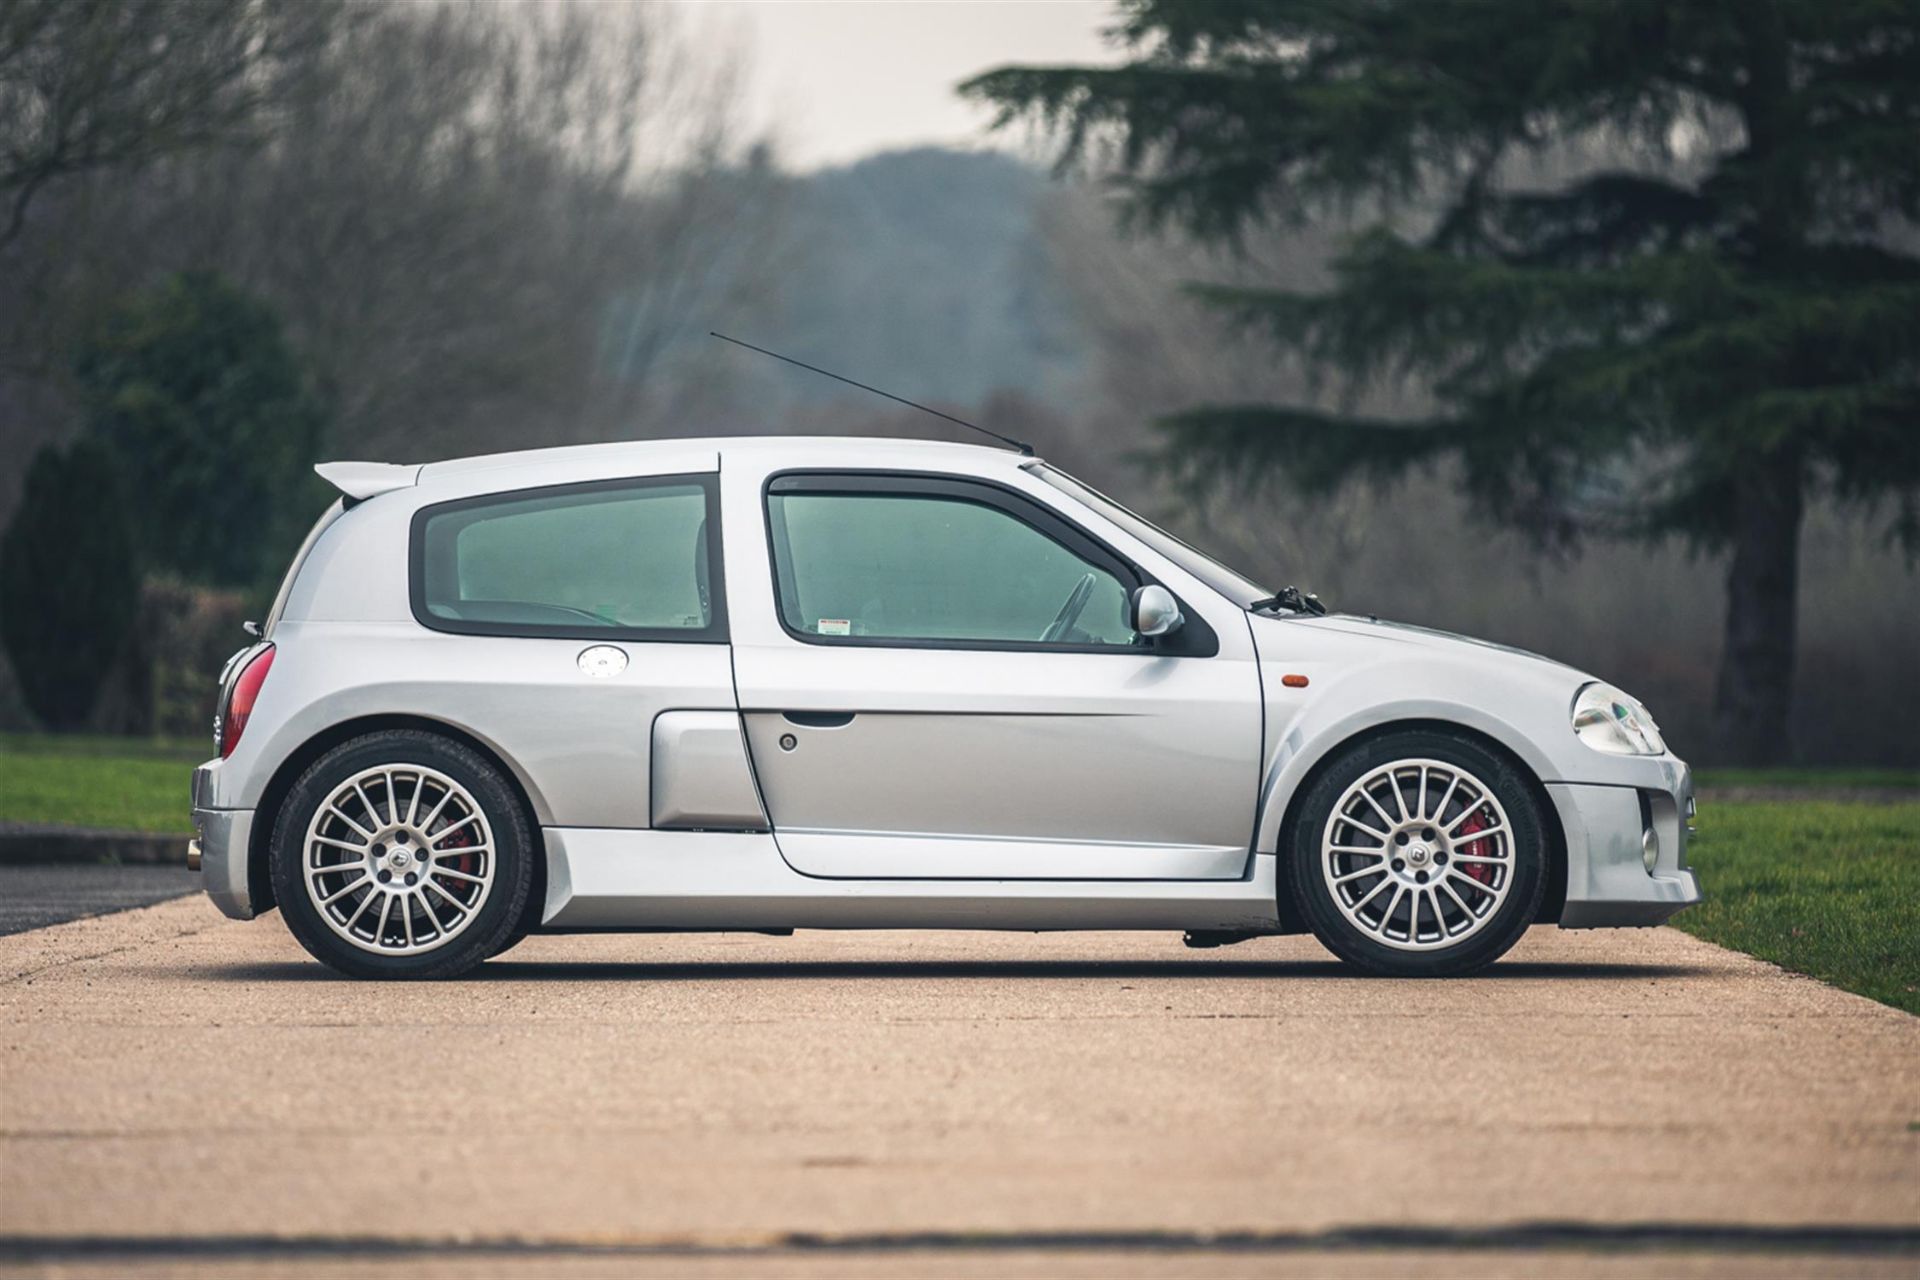 2002 Renault Sport Clio V6 (230) Phase 1 - Image 7 of 10